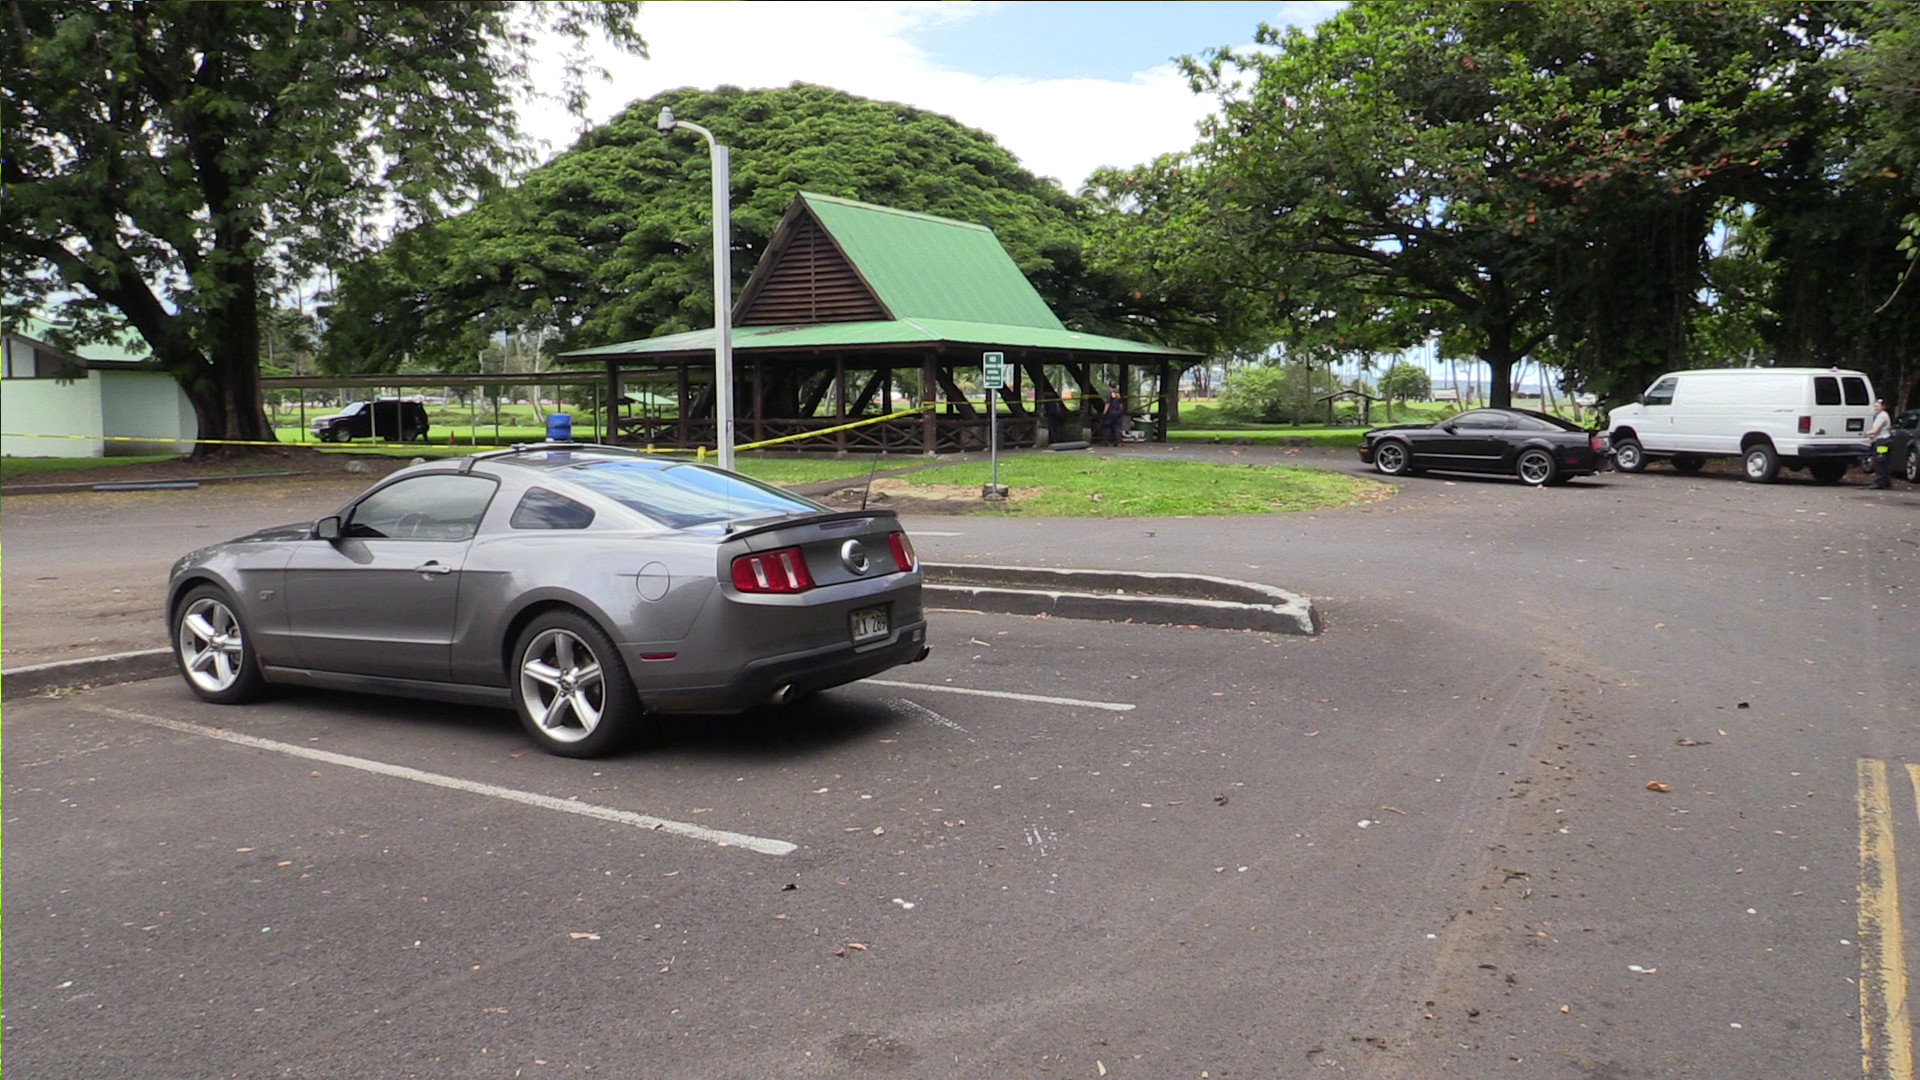 The scene of the alleged crime at Wailoa State Park in Hilo. Photography by Daryl W. Lee.